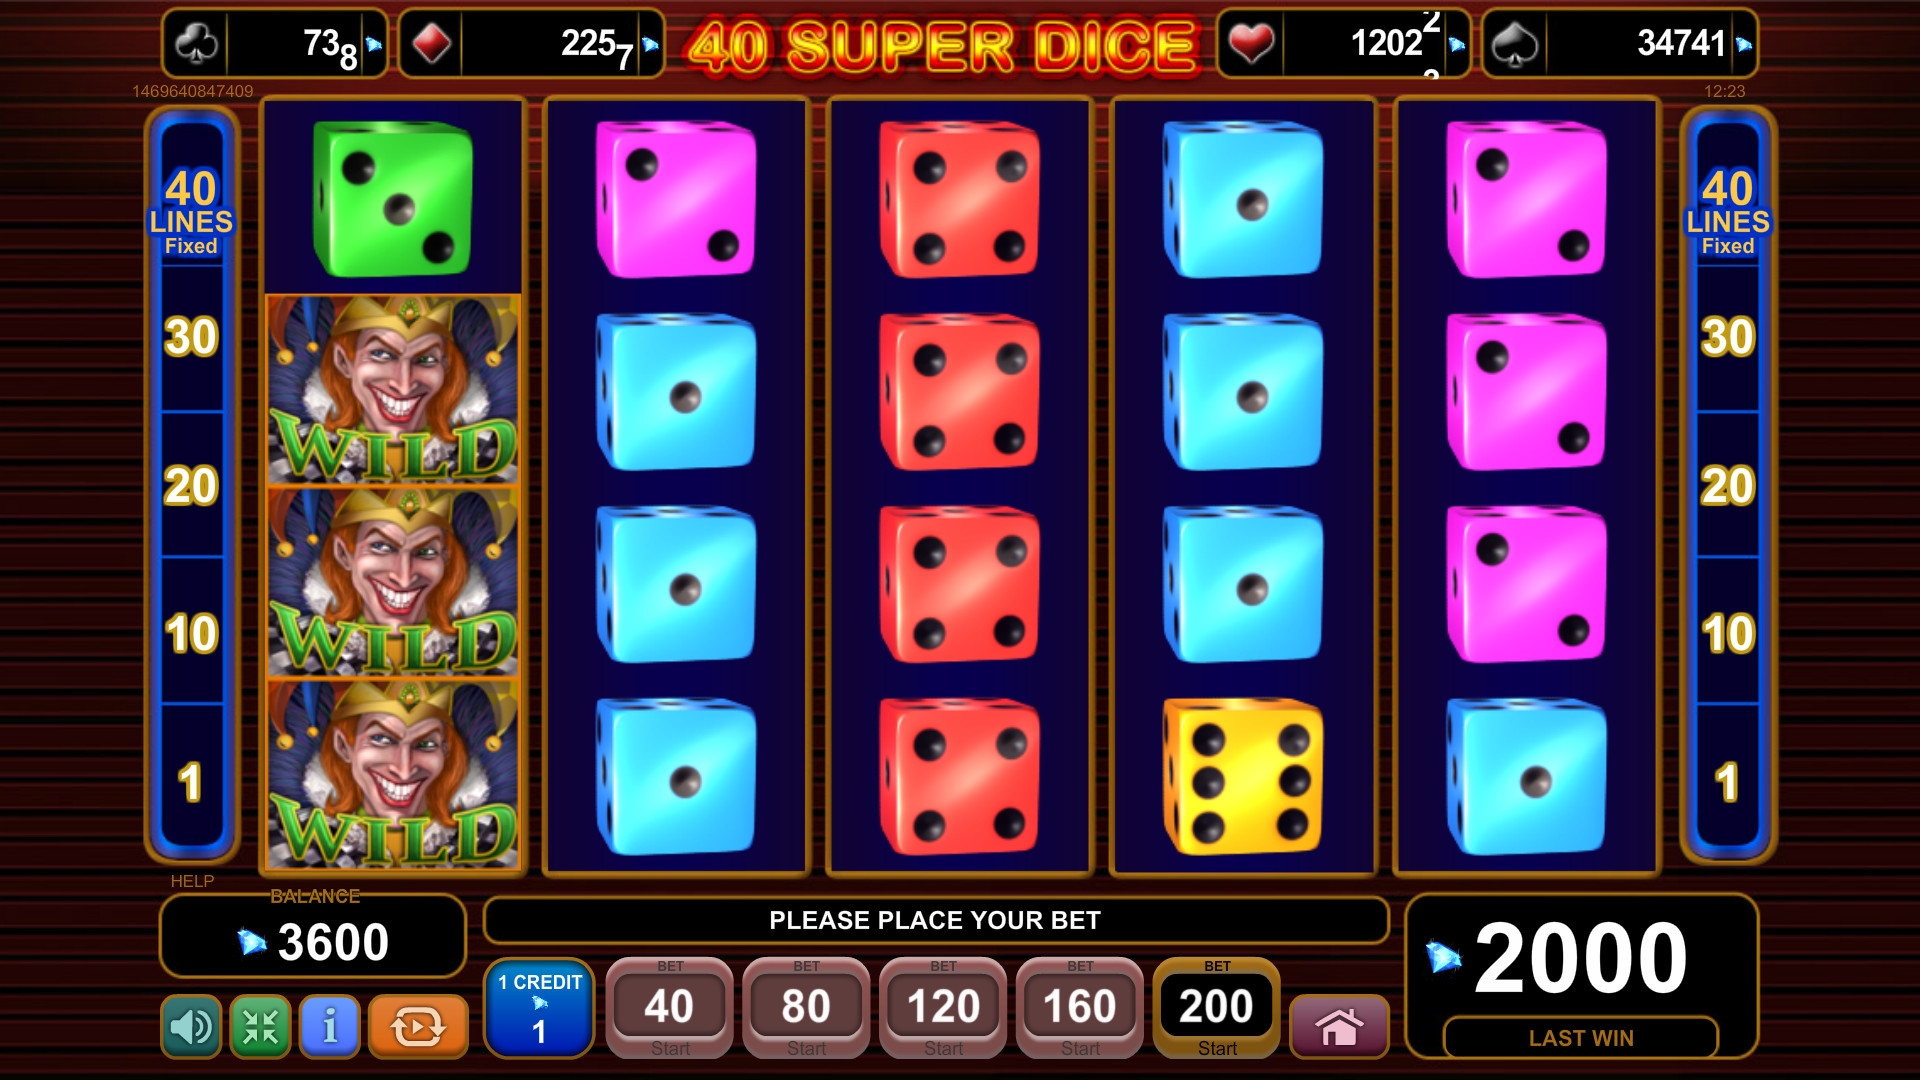 40 Super Dice (40 Super Dice) from category Slots